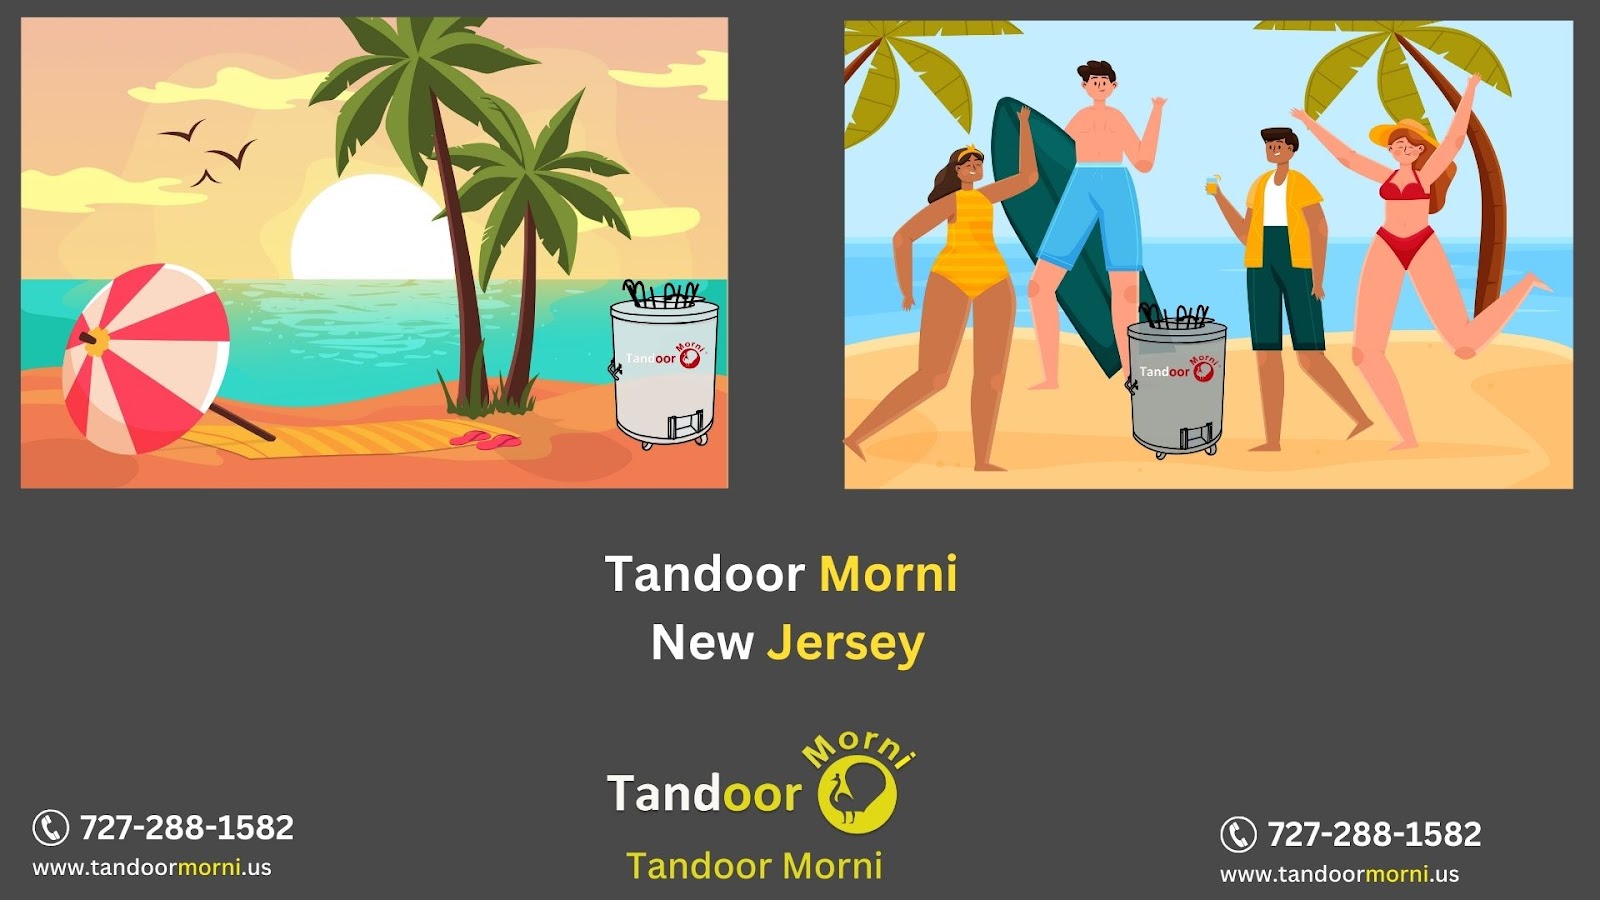 The picture depicts how diners and beachgoers in New Jersey are having a good time with tandoors and eating their breakfast fare.